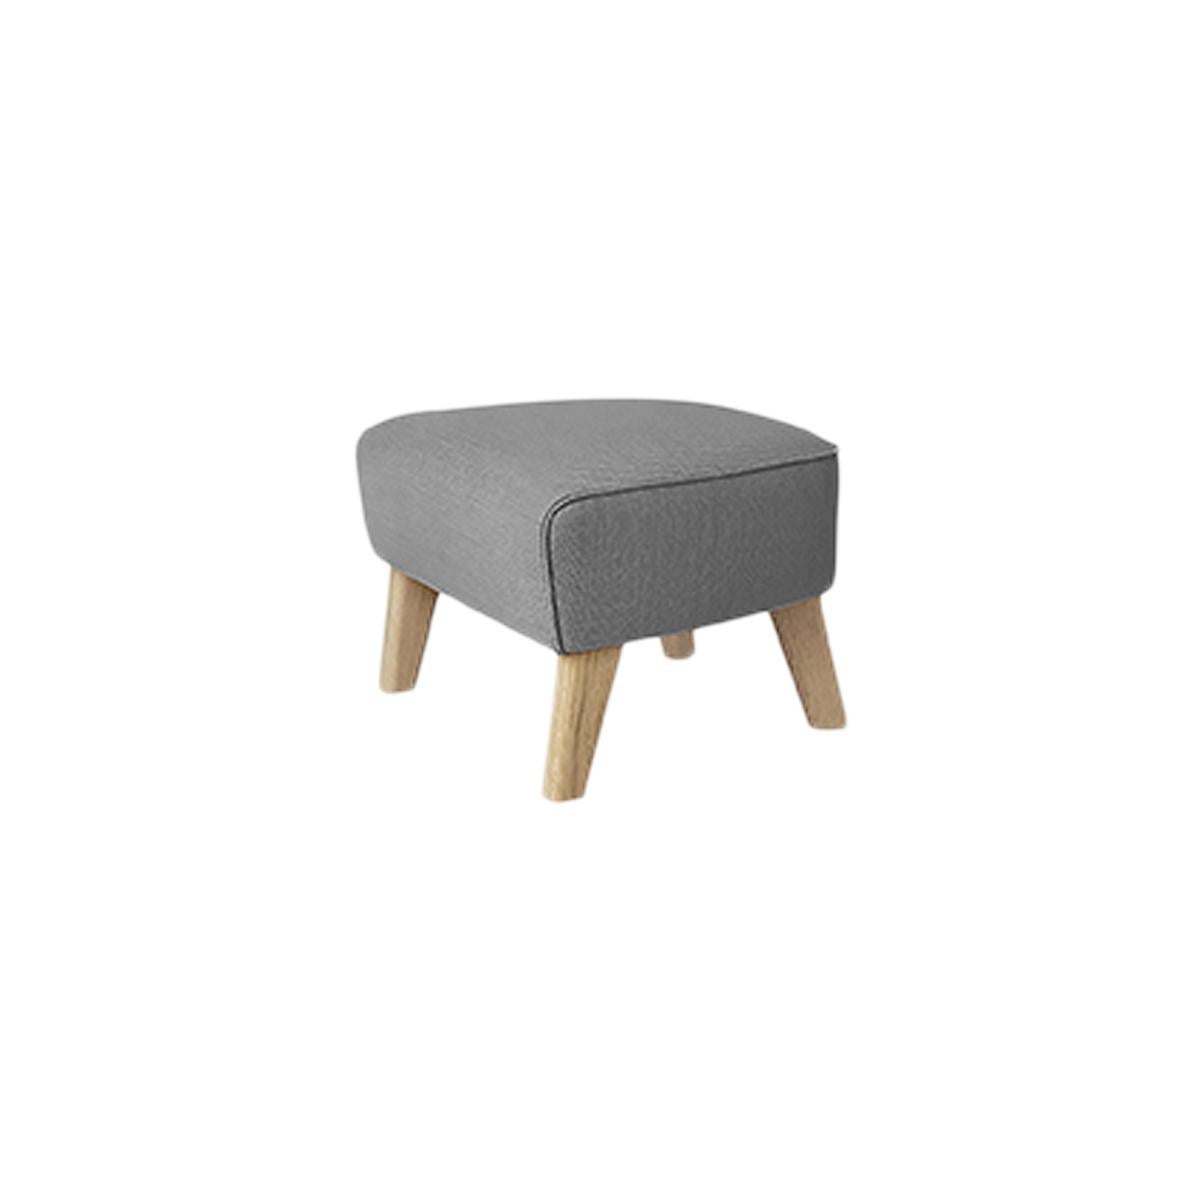 Grey and natural oak Raf Simons Vidar 3 my own chair footstool by Lassen
Dimensions: w 56 x d 58 x h 40 cm 
Materials: Textile
Also Available: Other colors available.

The My Own chair footstool has been designed in the same spirit as Flemming